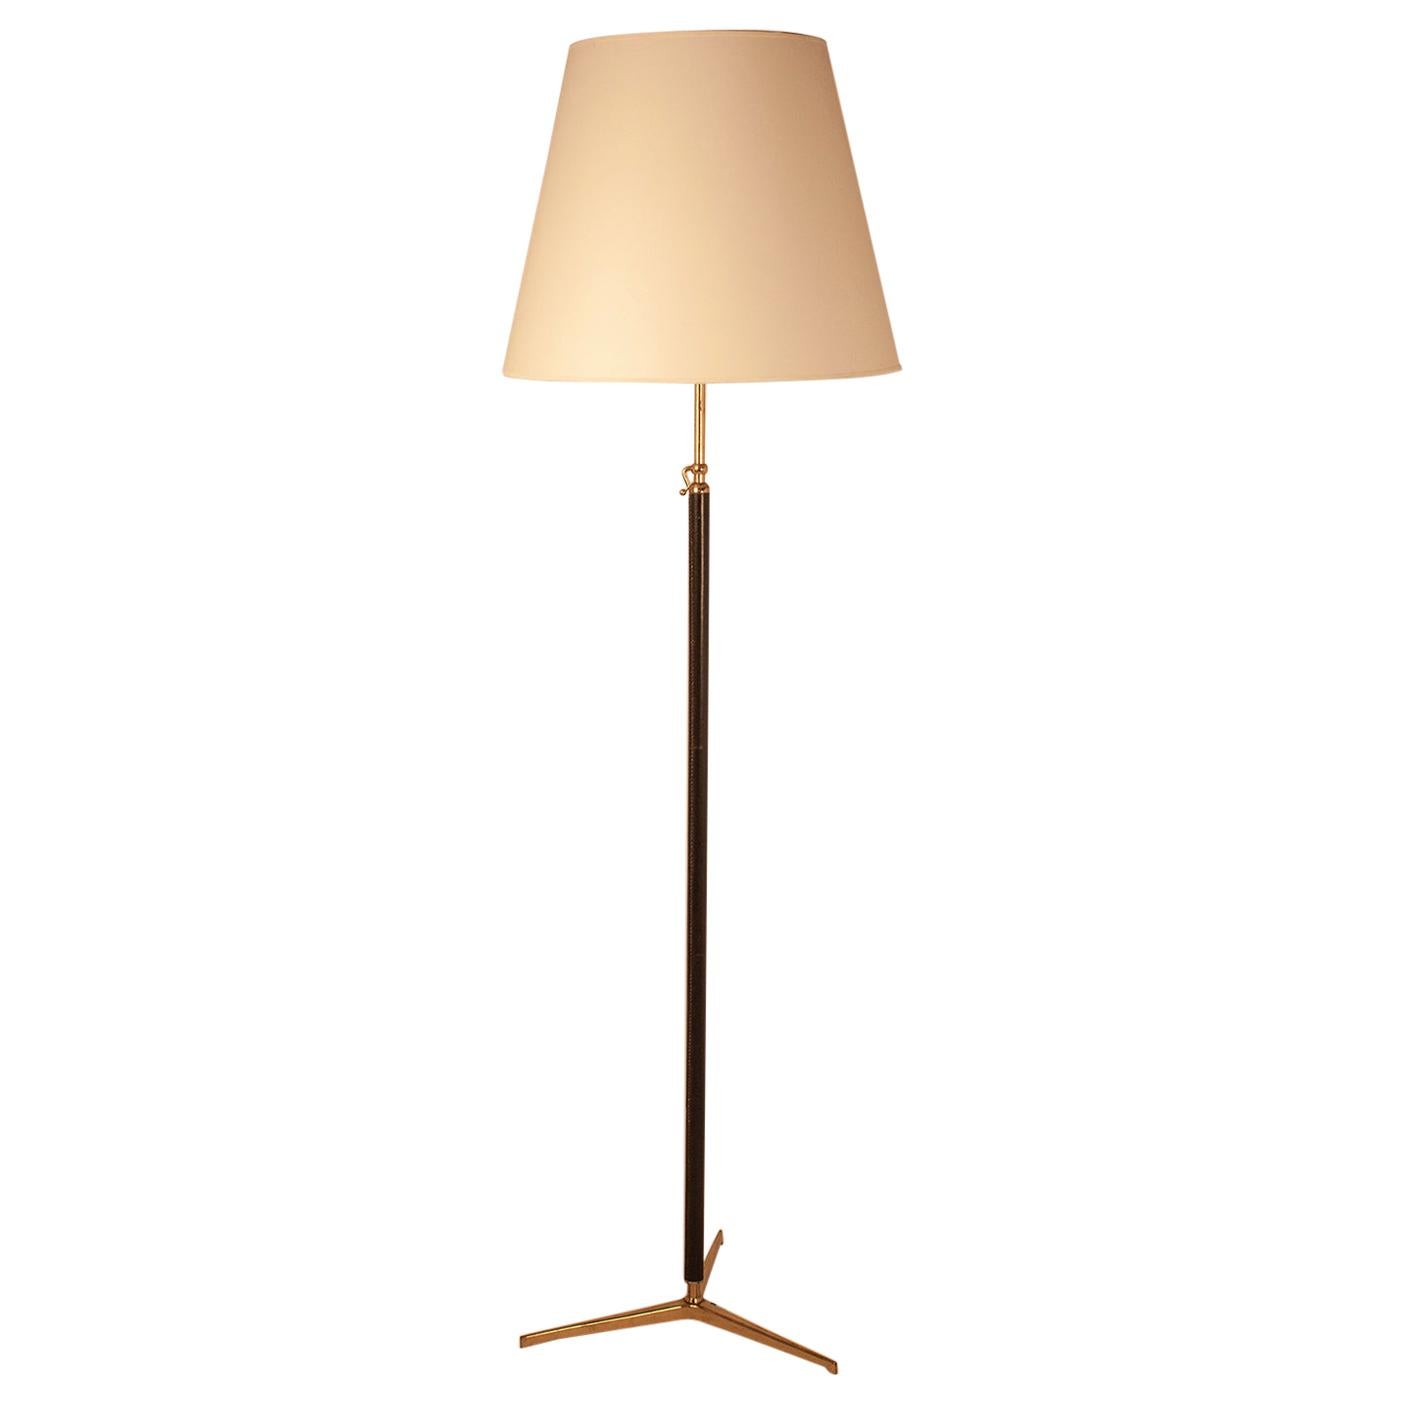 Floor Lamp Attributed to Gino Sarfatti, Midcentury, Leather and Gold Brass